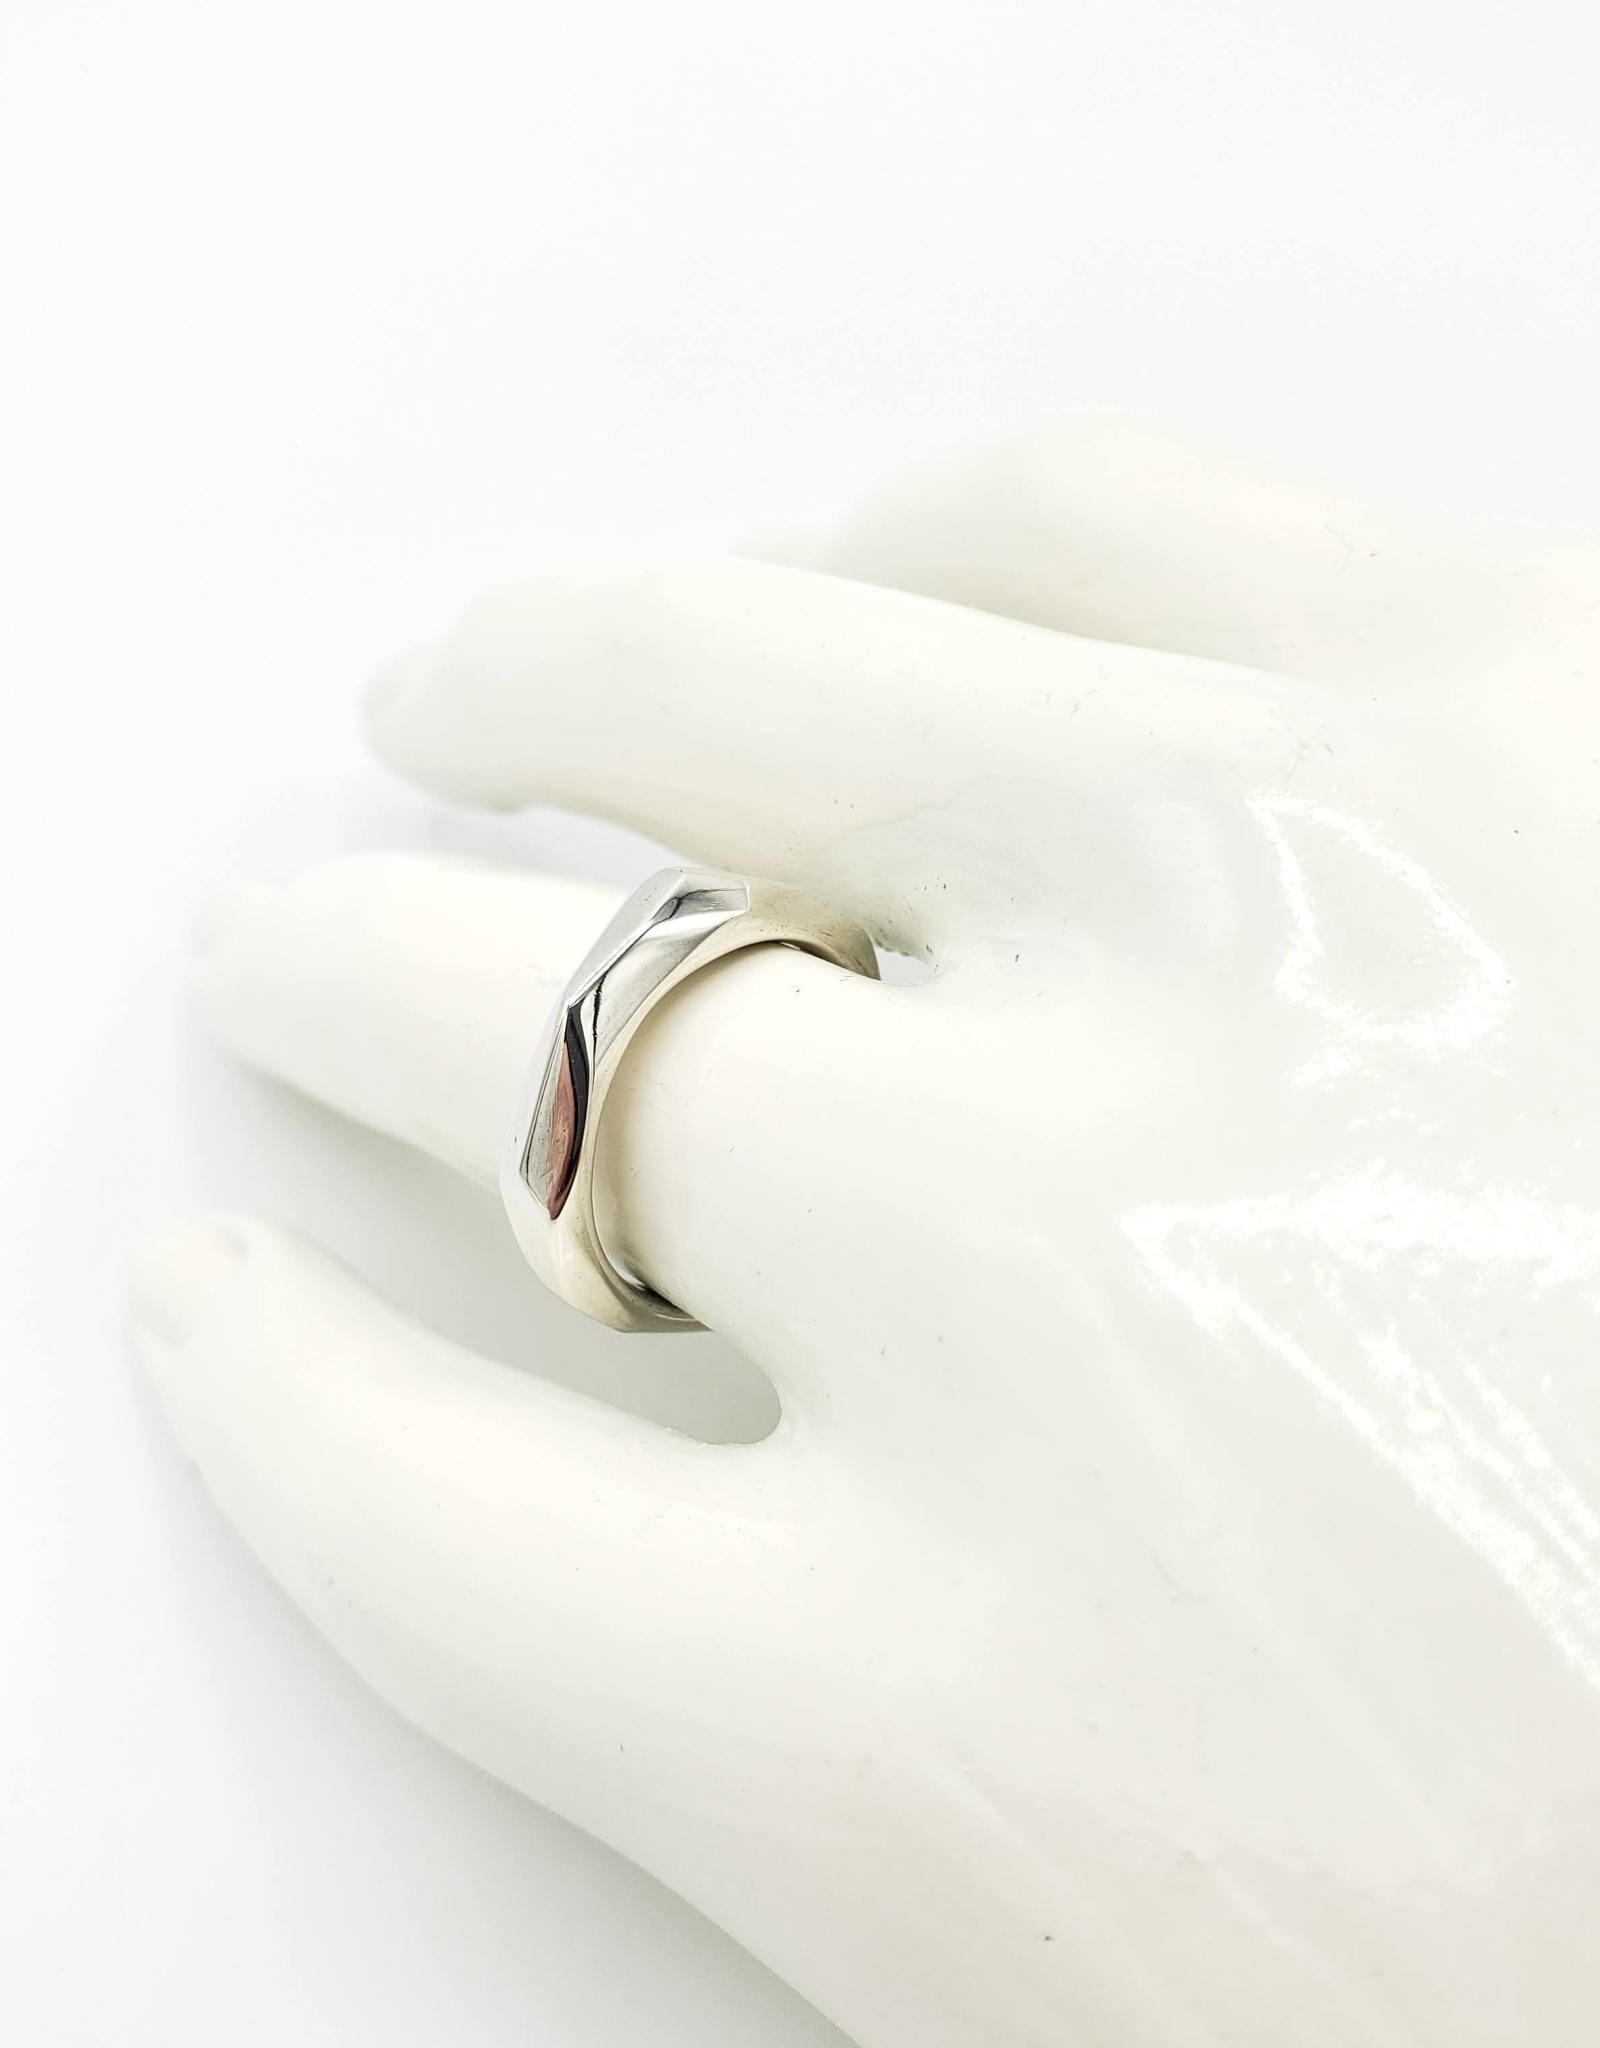 Redux Faceted Sterling Silver Ring, Lightweight